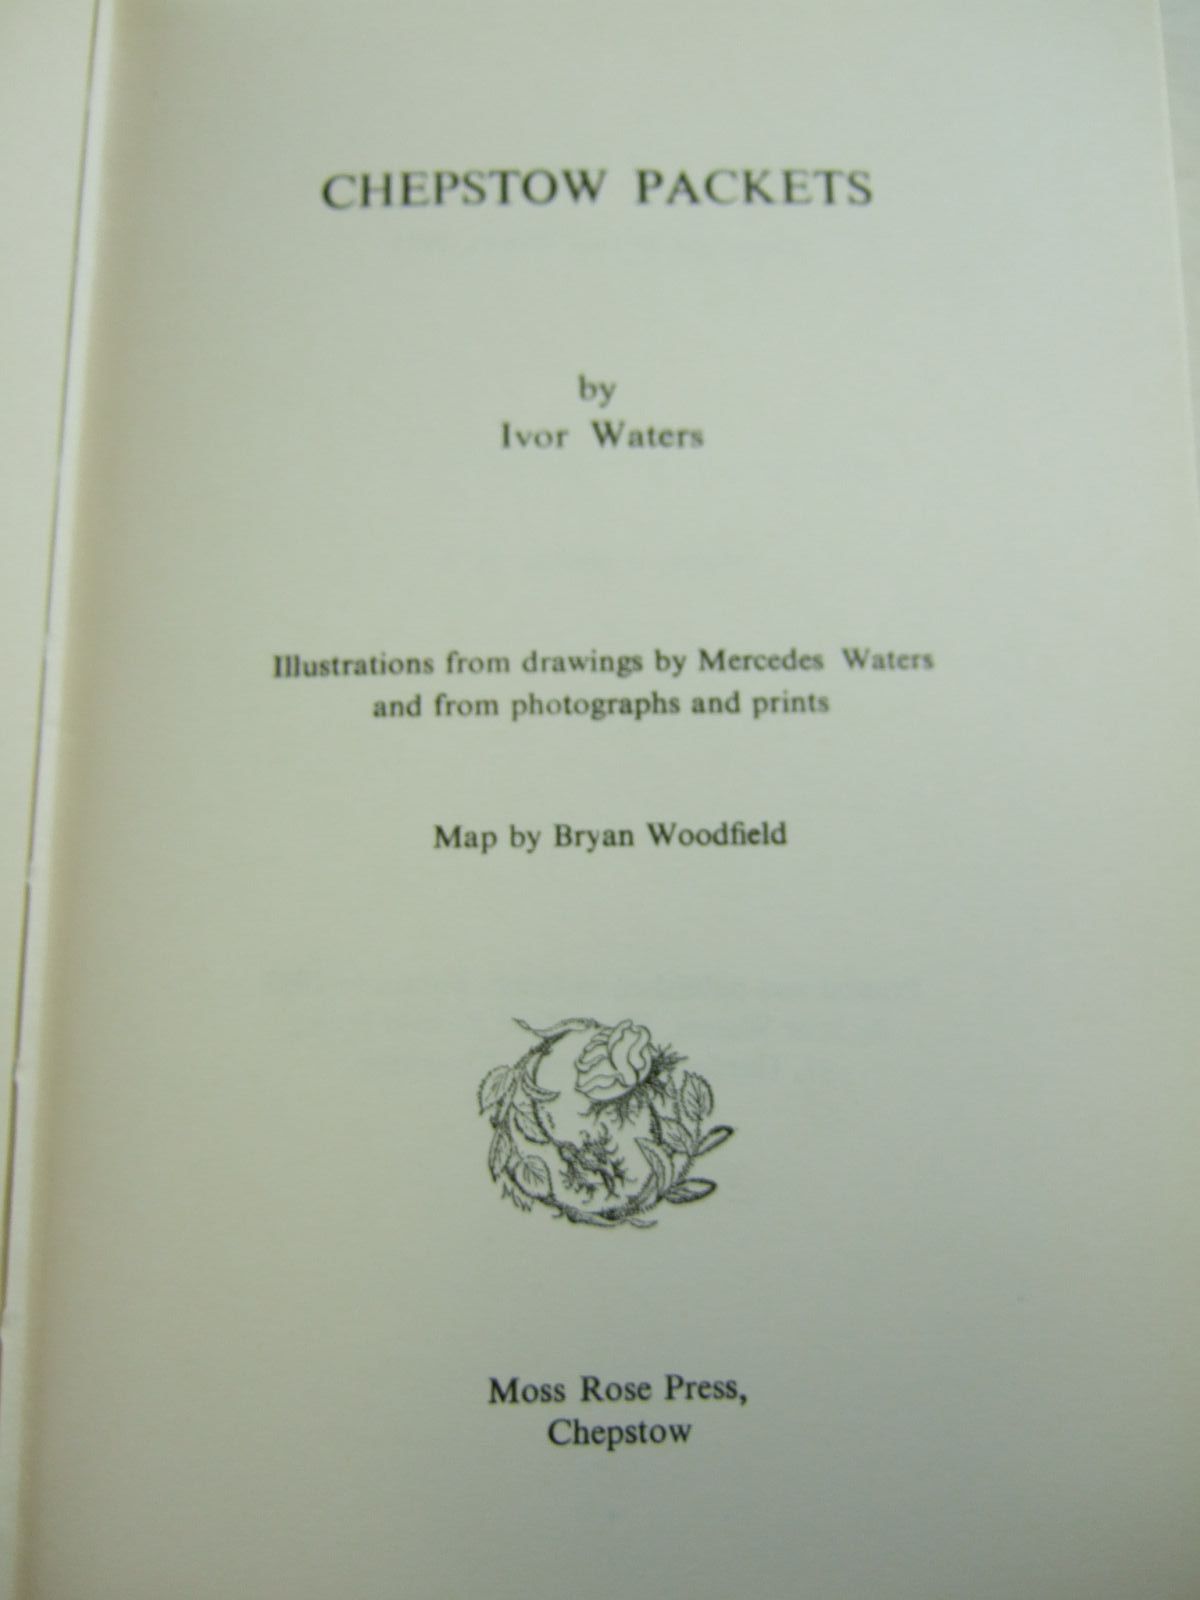 Photo of CHEPSTOW PACKETS written by Waters, Ivor illustrated by Waters, Mercedes
Woodfield, Bryan published by Moss Rose Press (STOCK CODE: 2108995)  for sale by Stella & Rose's Books